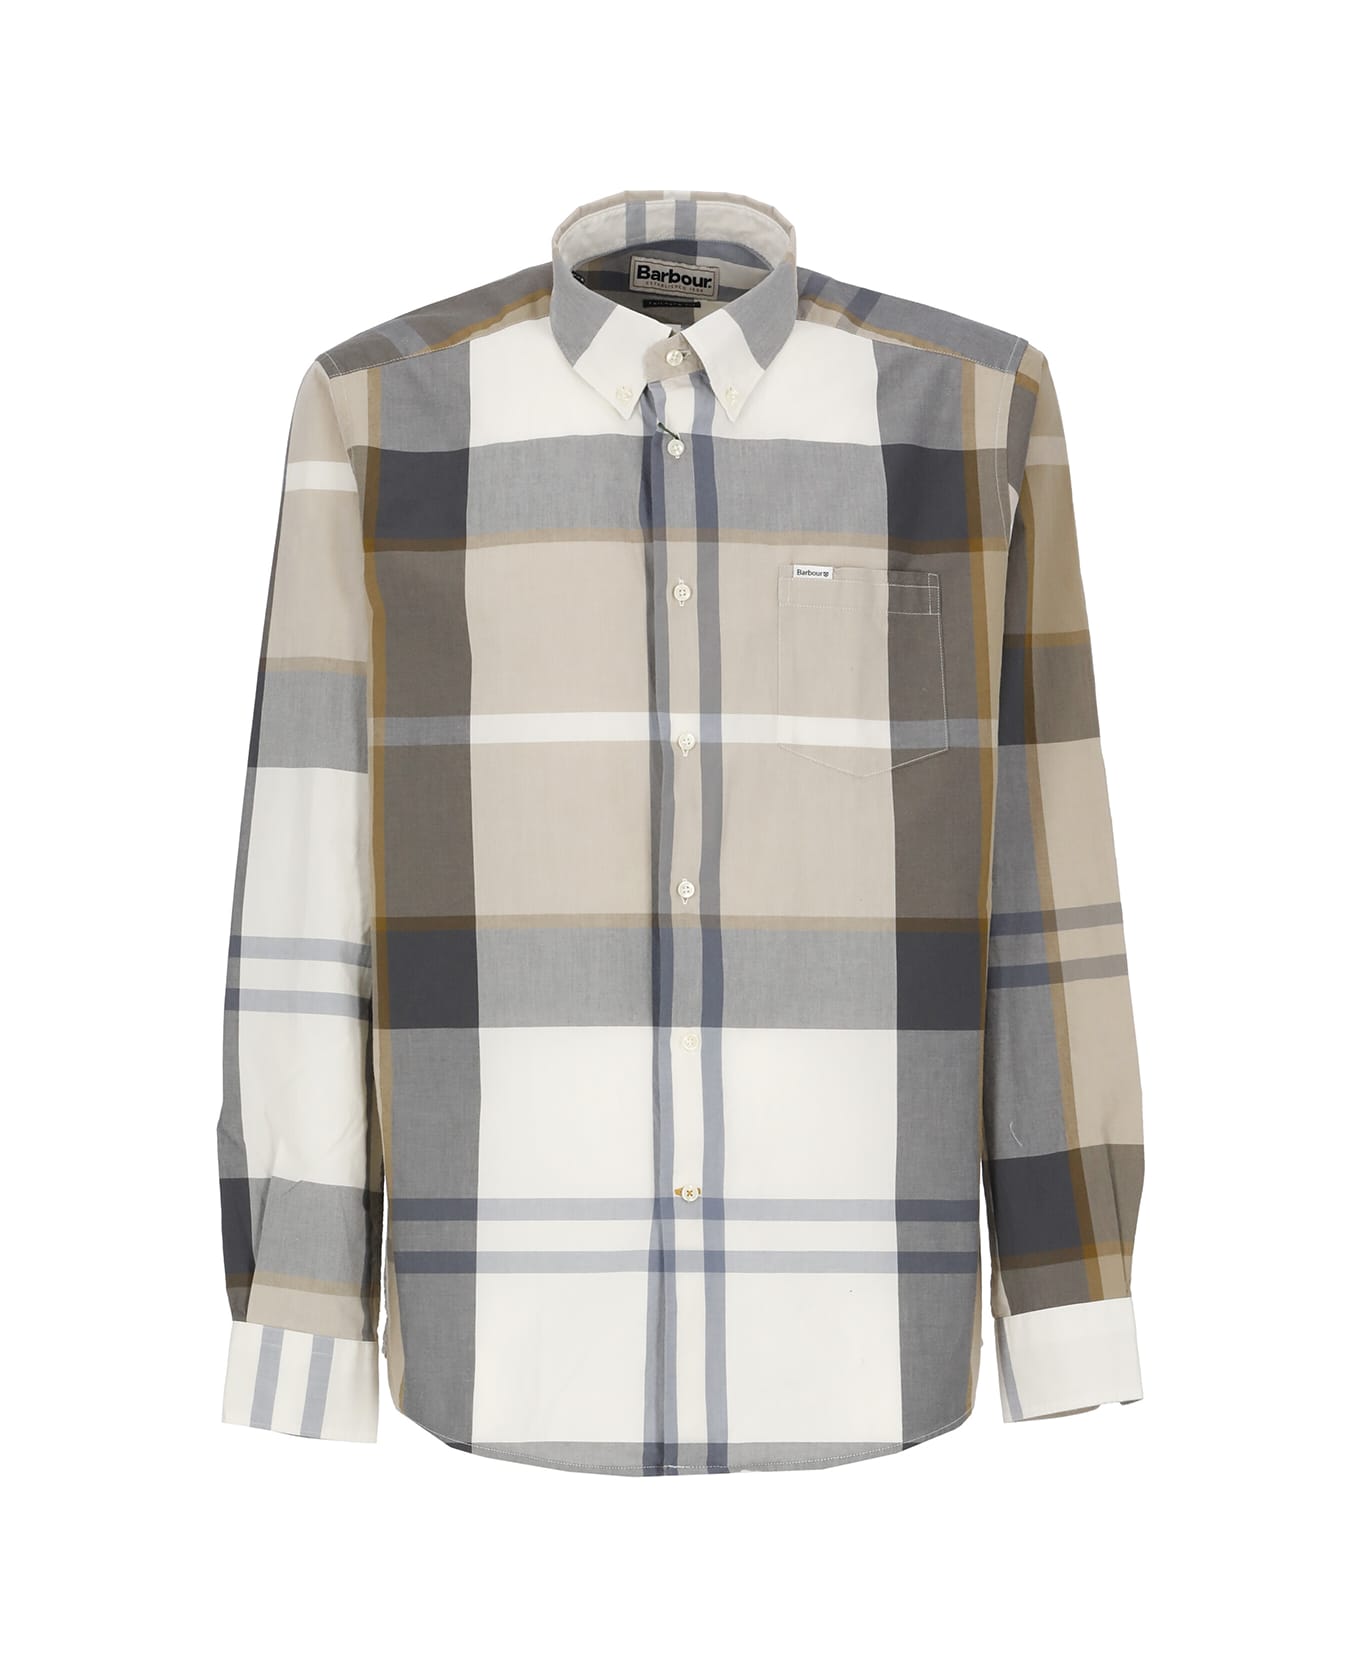 Barbour Shirt With Tartan Pattern - MULTICOLOR